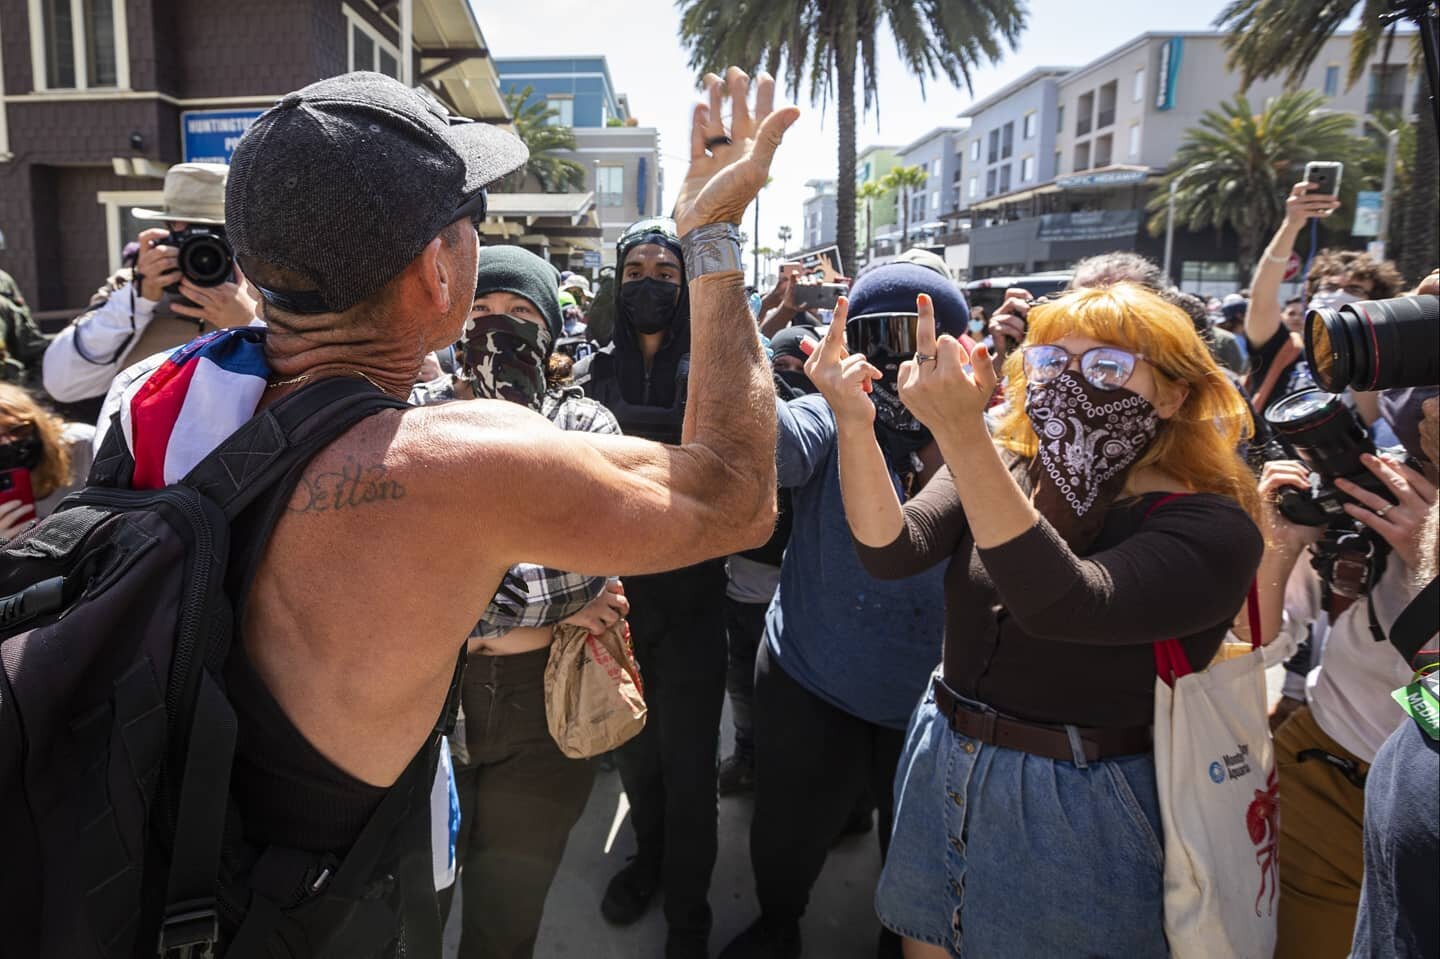 Middle fingers, horses, and civil unrest. Just another day at the office. 

Authorities eventually declared an unlawful assembly after things got out of hand last Sunday in Huntington Beach. I was there, and I still couldn't tell you what happened. M